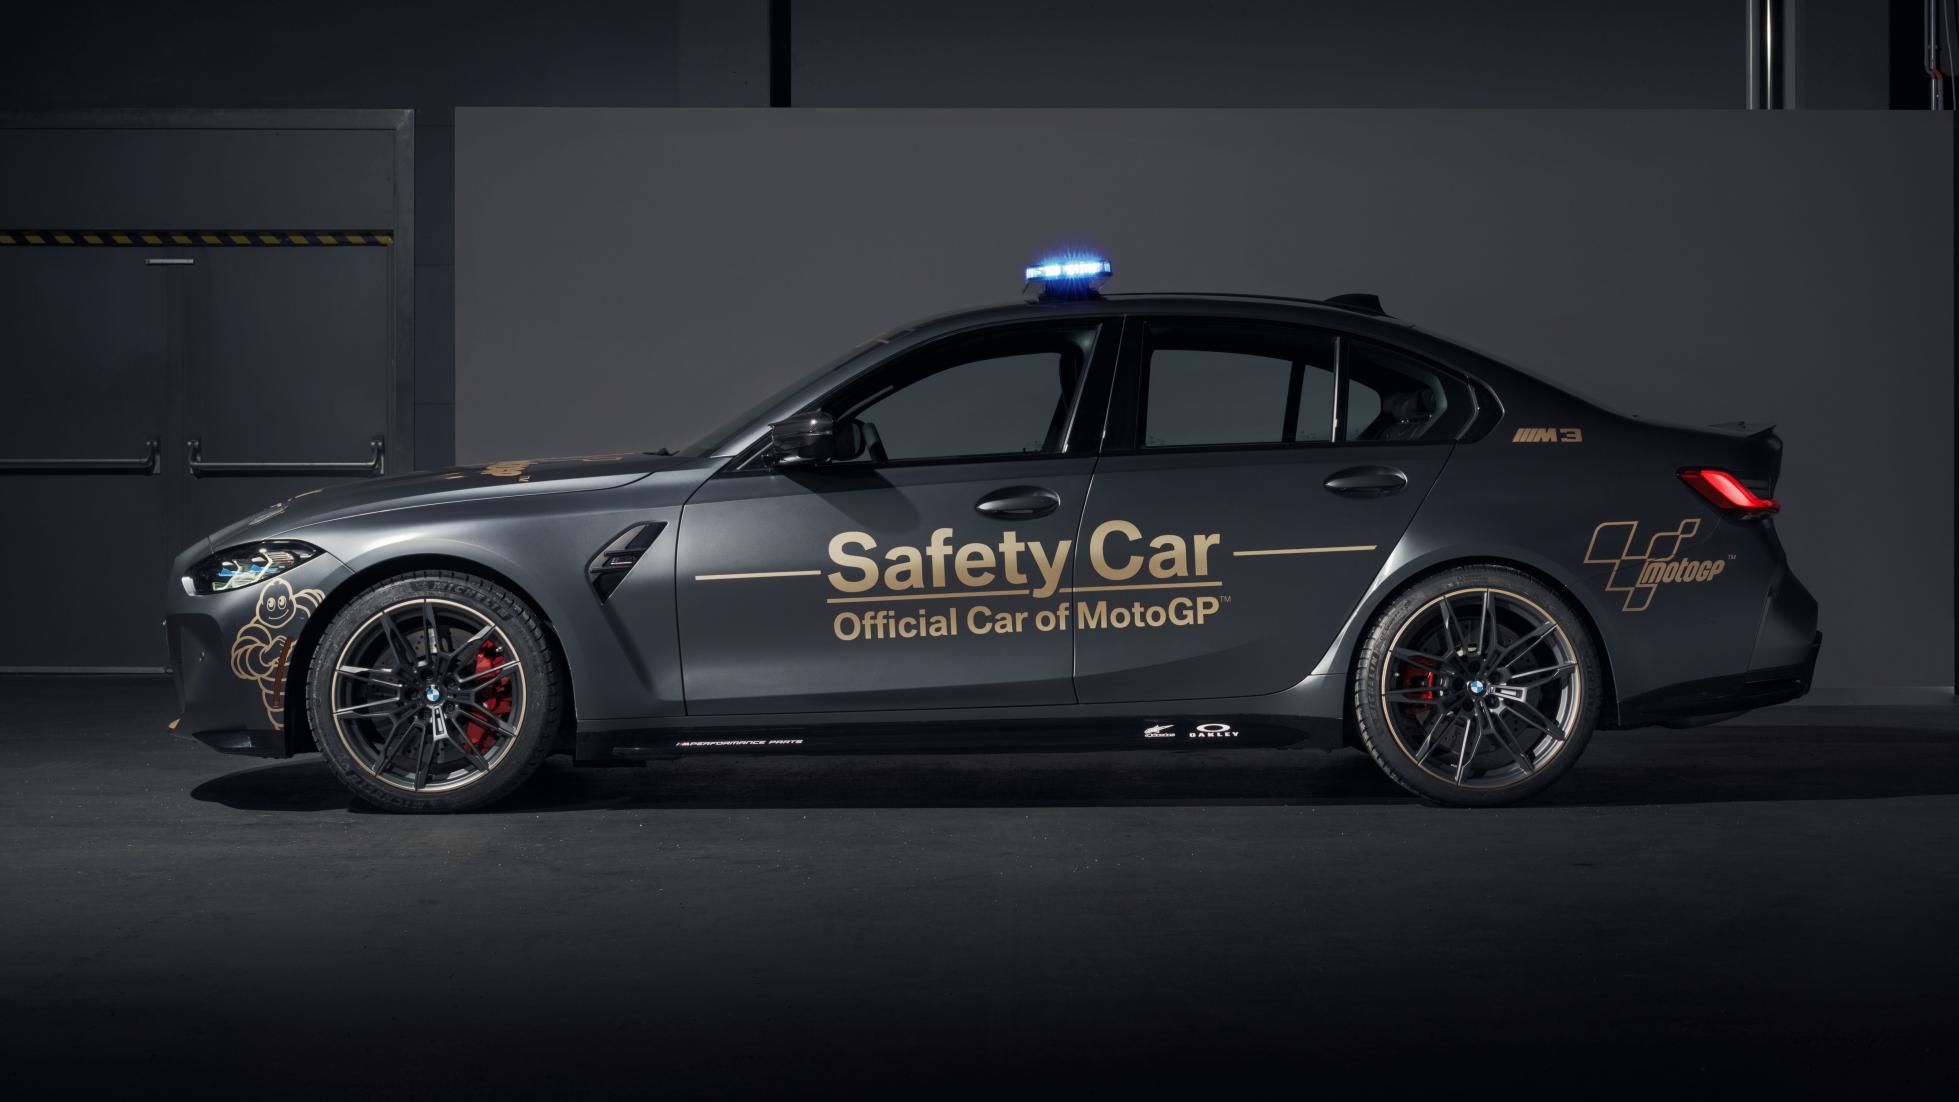 The BMW M3 as a MotoGP safety car, profile